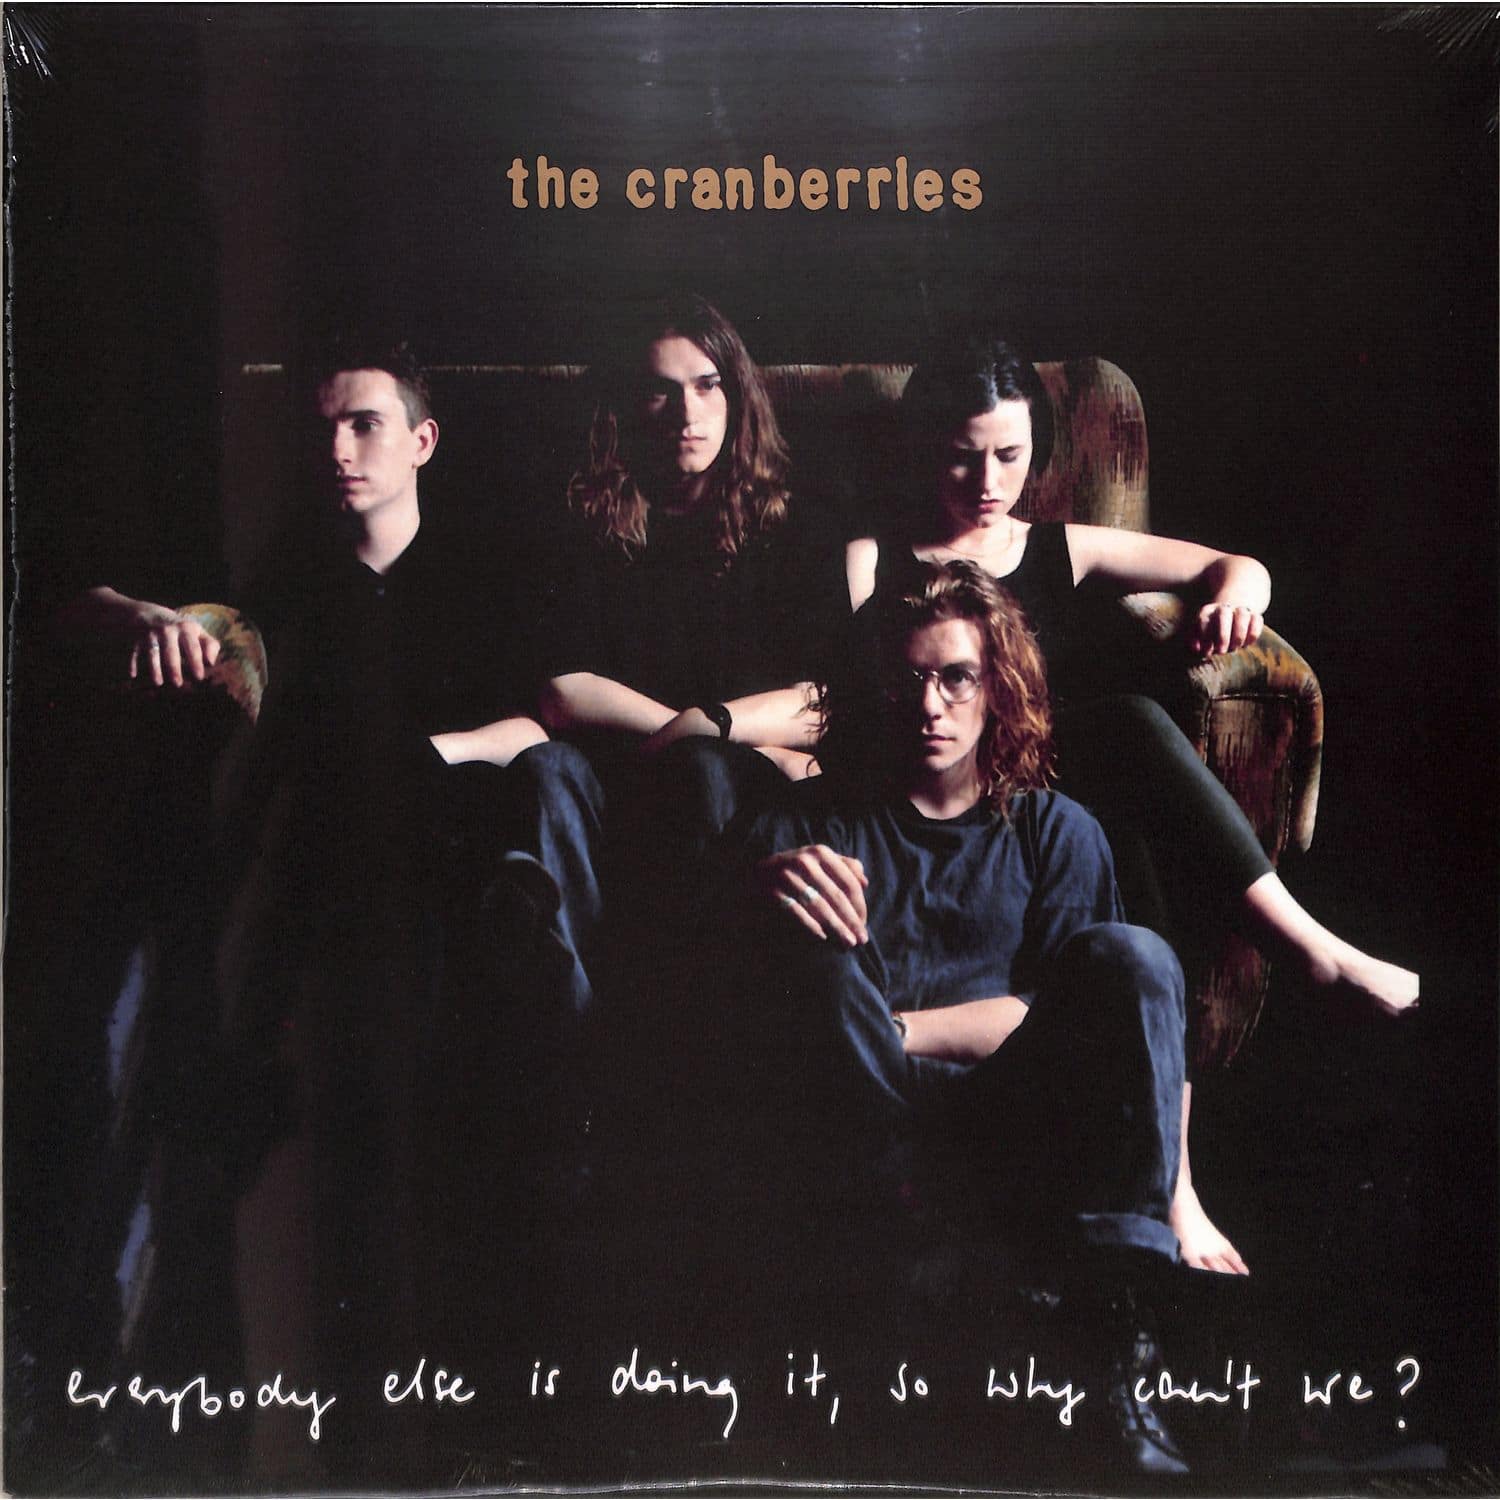 The Cranberries - EVERYBODY ELSE IS DOING IT, SO WHY CANT WE? 